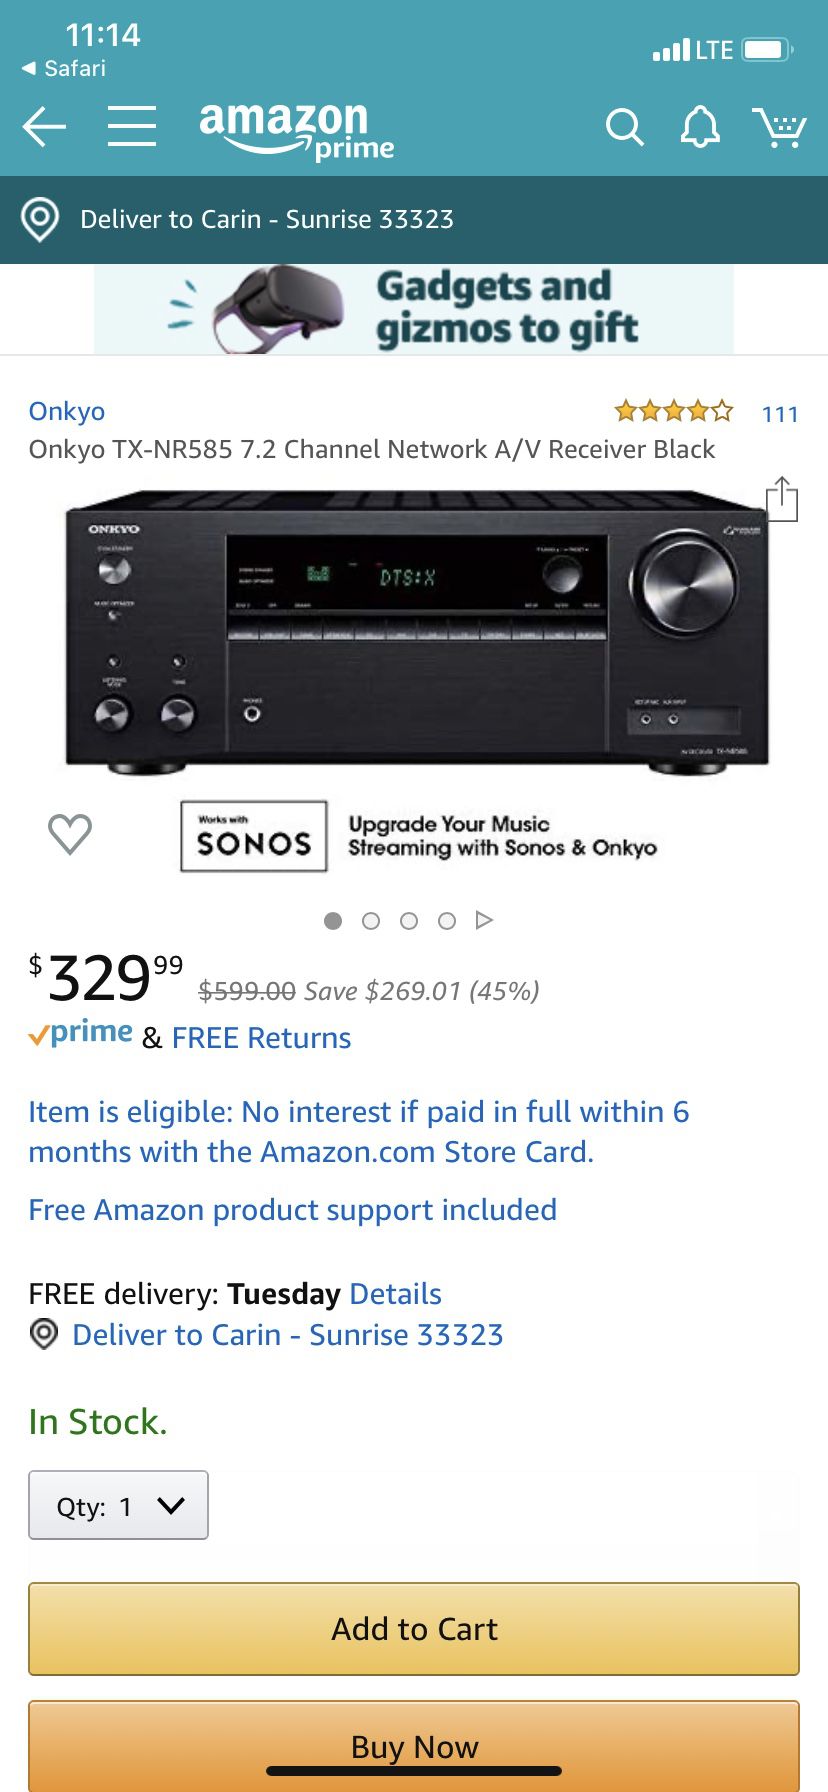 Onkyo 7.2 4K speakers and receiver